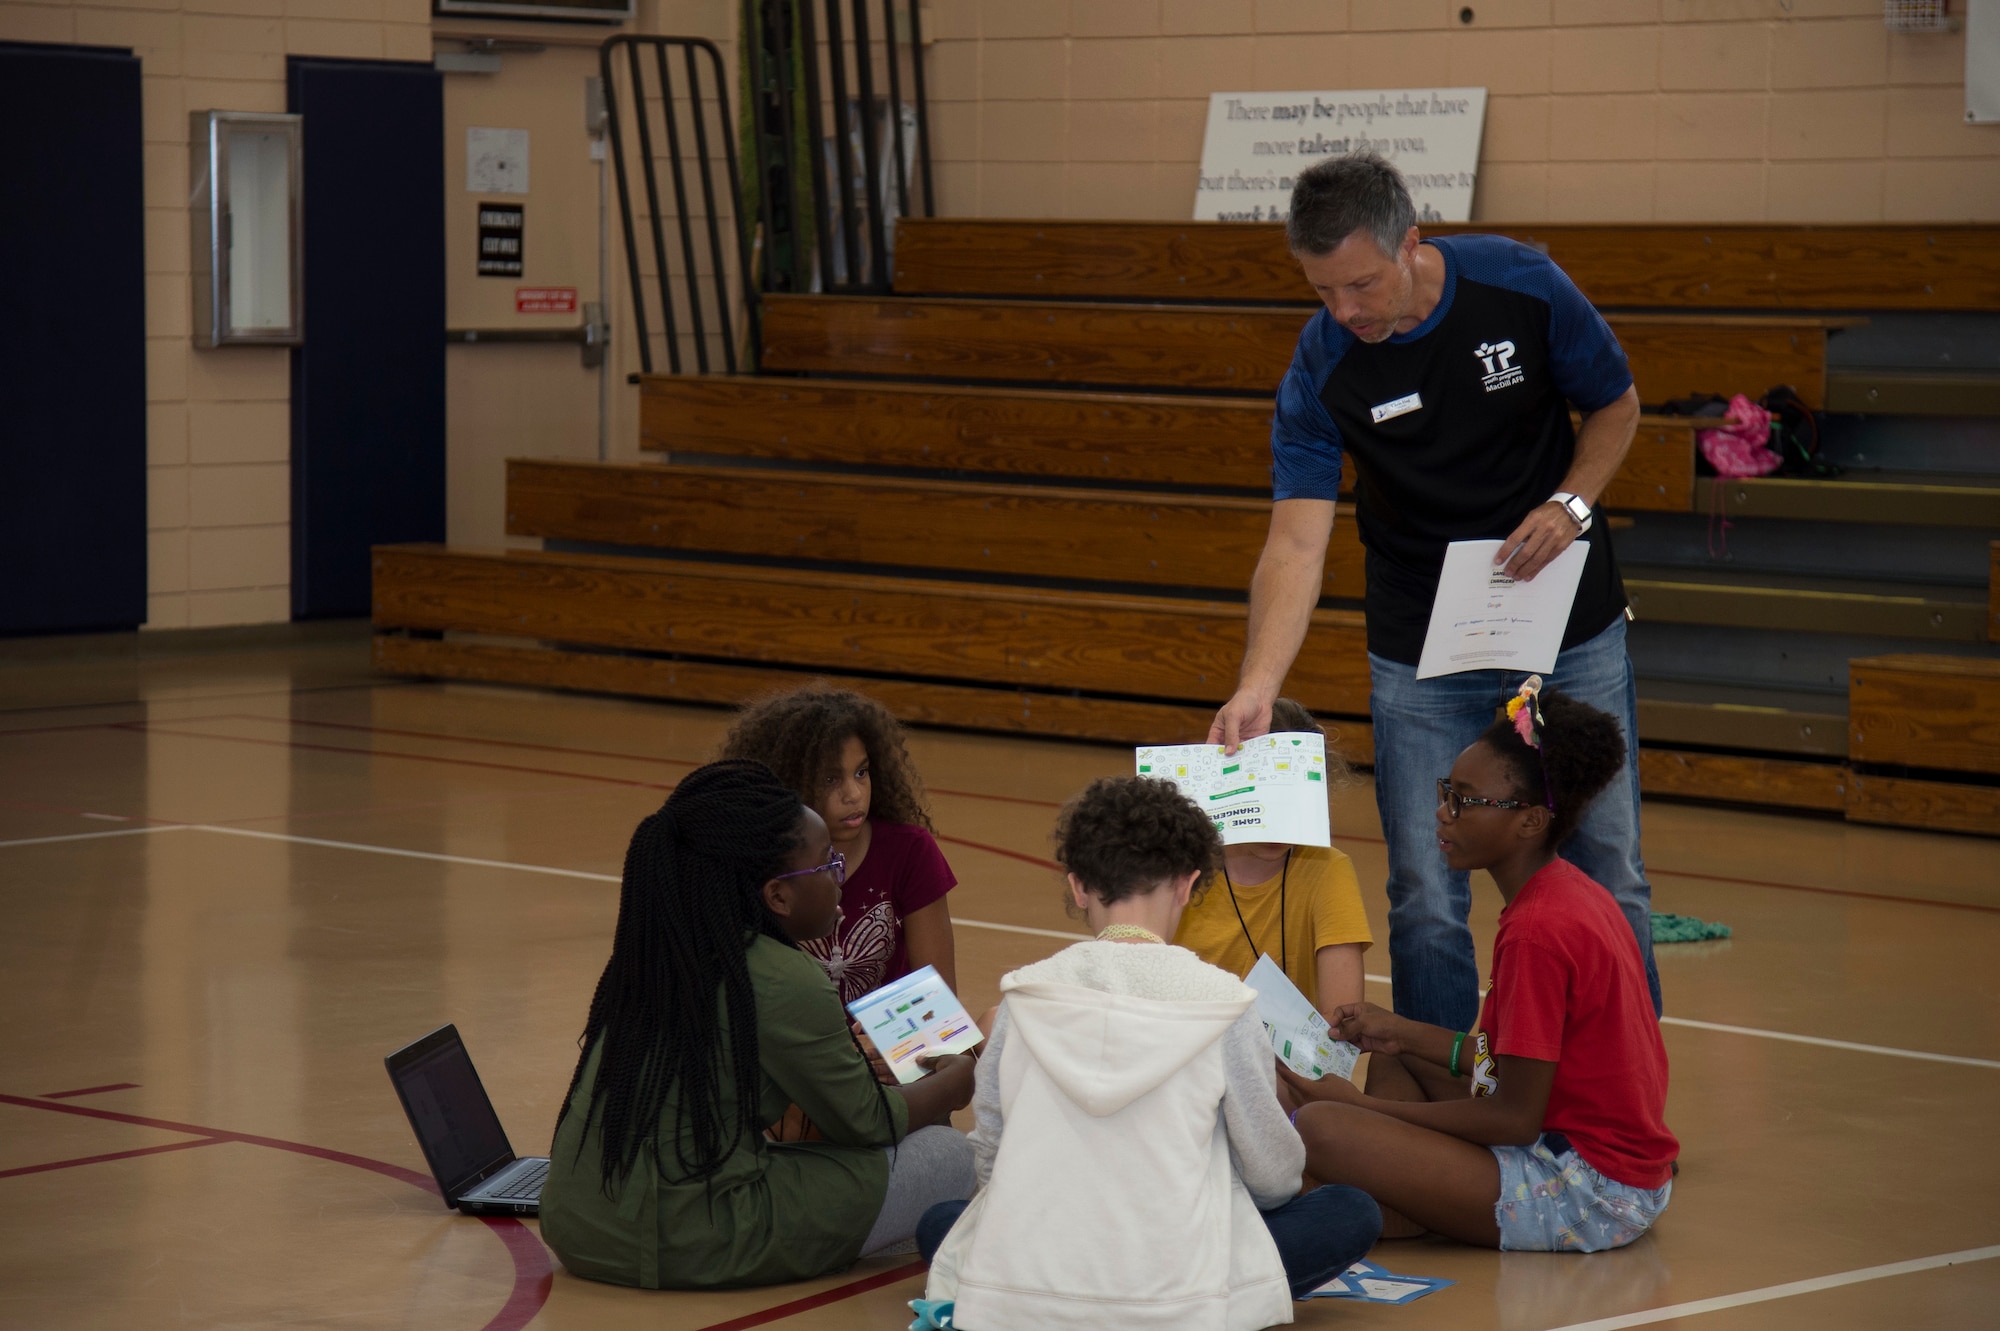 Chris Hug, 6th Force Support Squadron youth programs director, hands instruction cards to MacDill Youth Center members, Oct. 9, 2019, at MacDill Air Force Base, Fla. The MacDill Youth Center and 4-H team members with Hillsborough County hosted a 4-H National Youth Science Day to introduce MacDill’s youth to computer science and programming. (U.S. Air Force photo by Airman 1st Class Shannon Bowman)